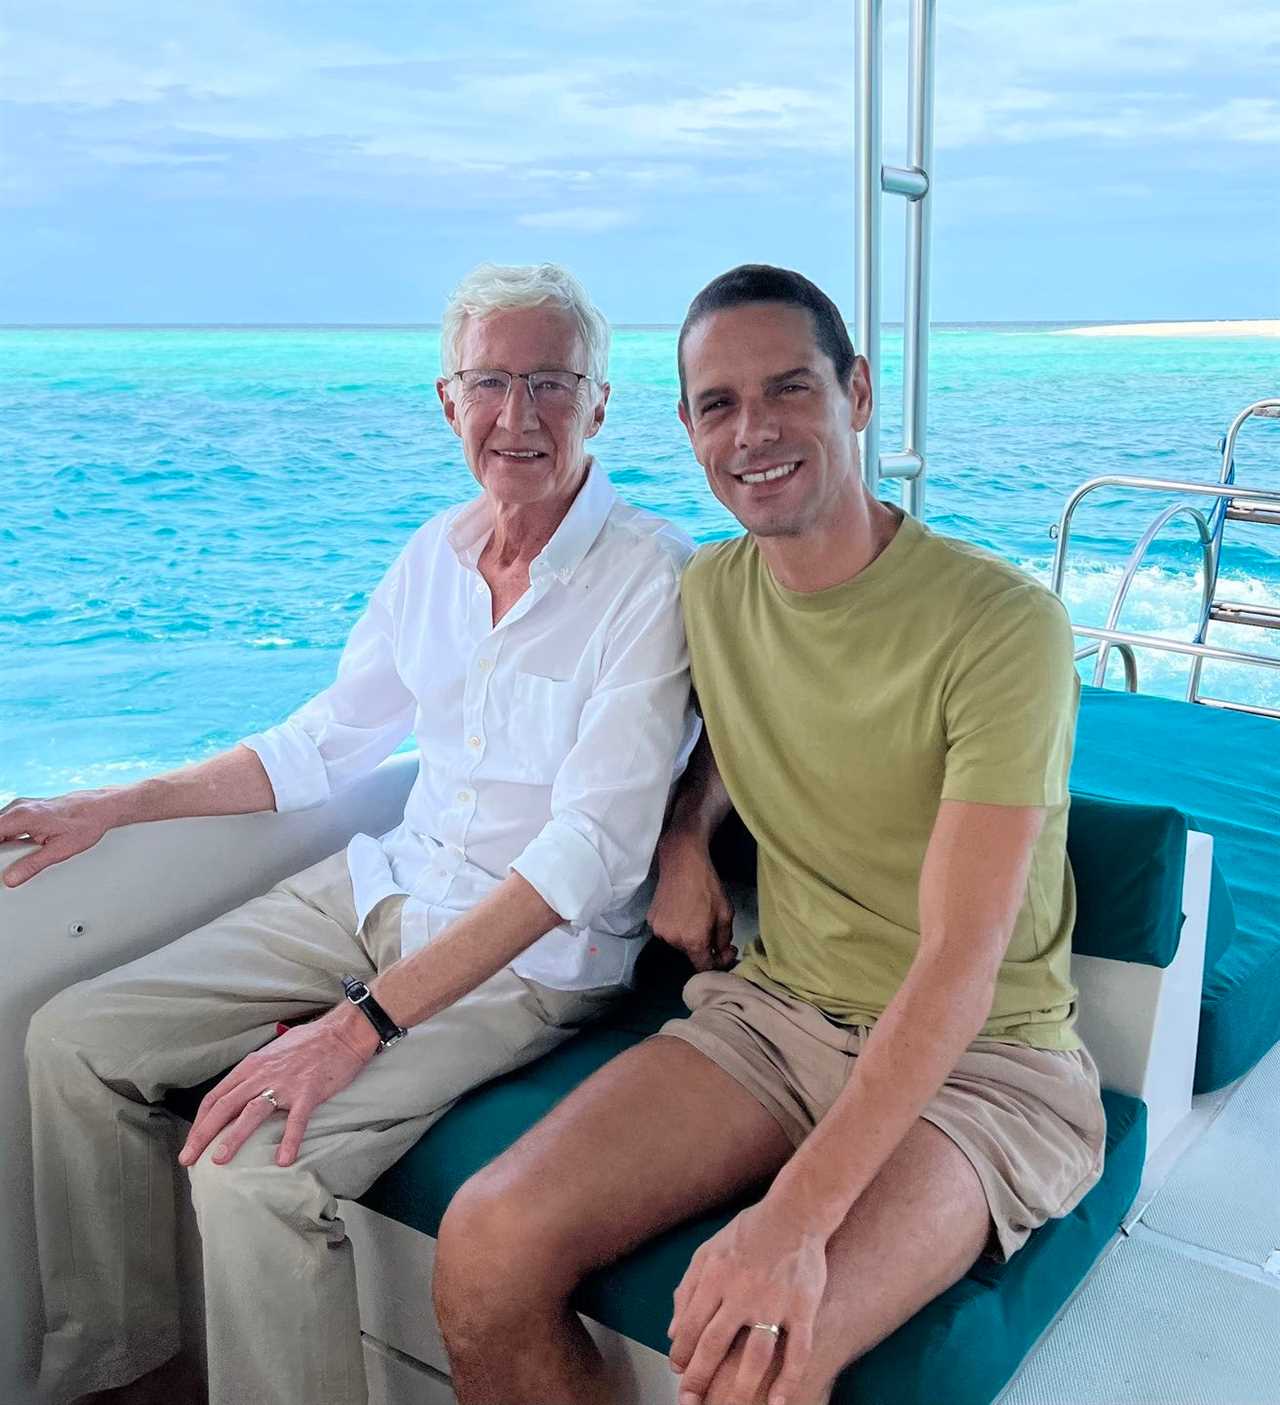 Paul O’Grady’s husband Andre shares final picture of them together on holiday before star’s shock death